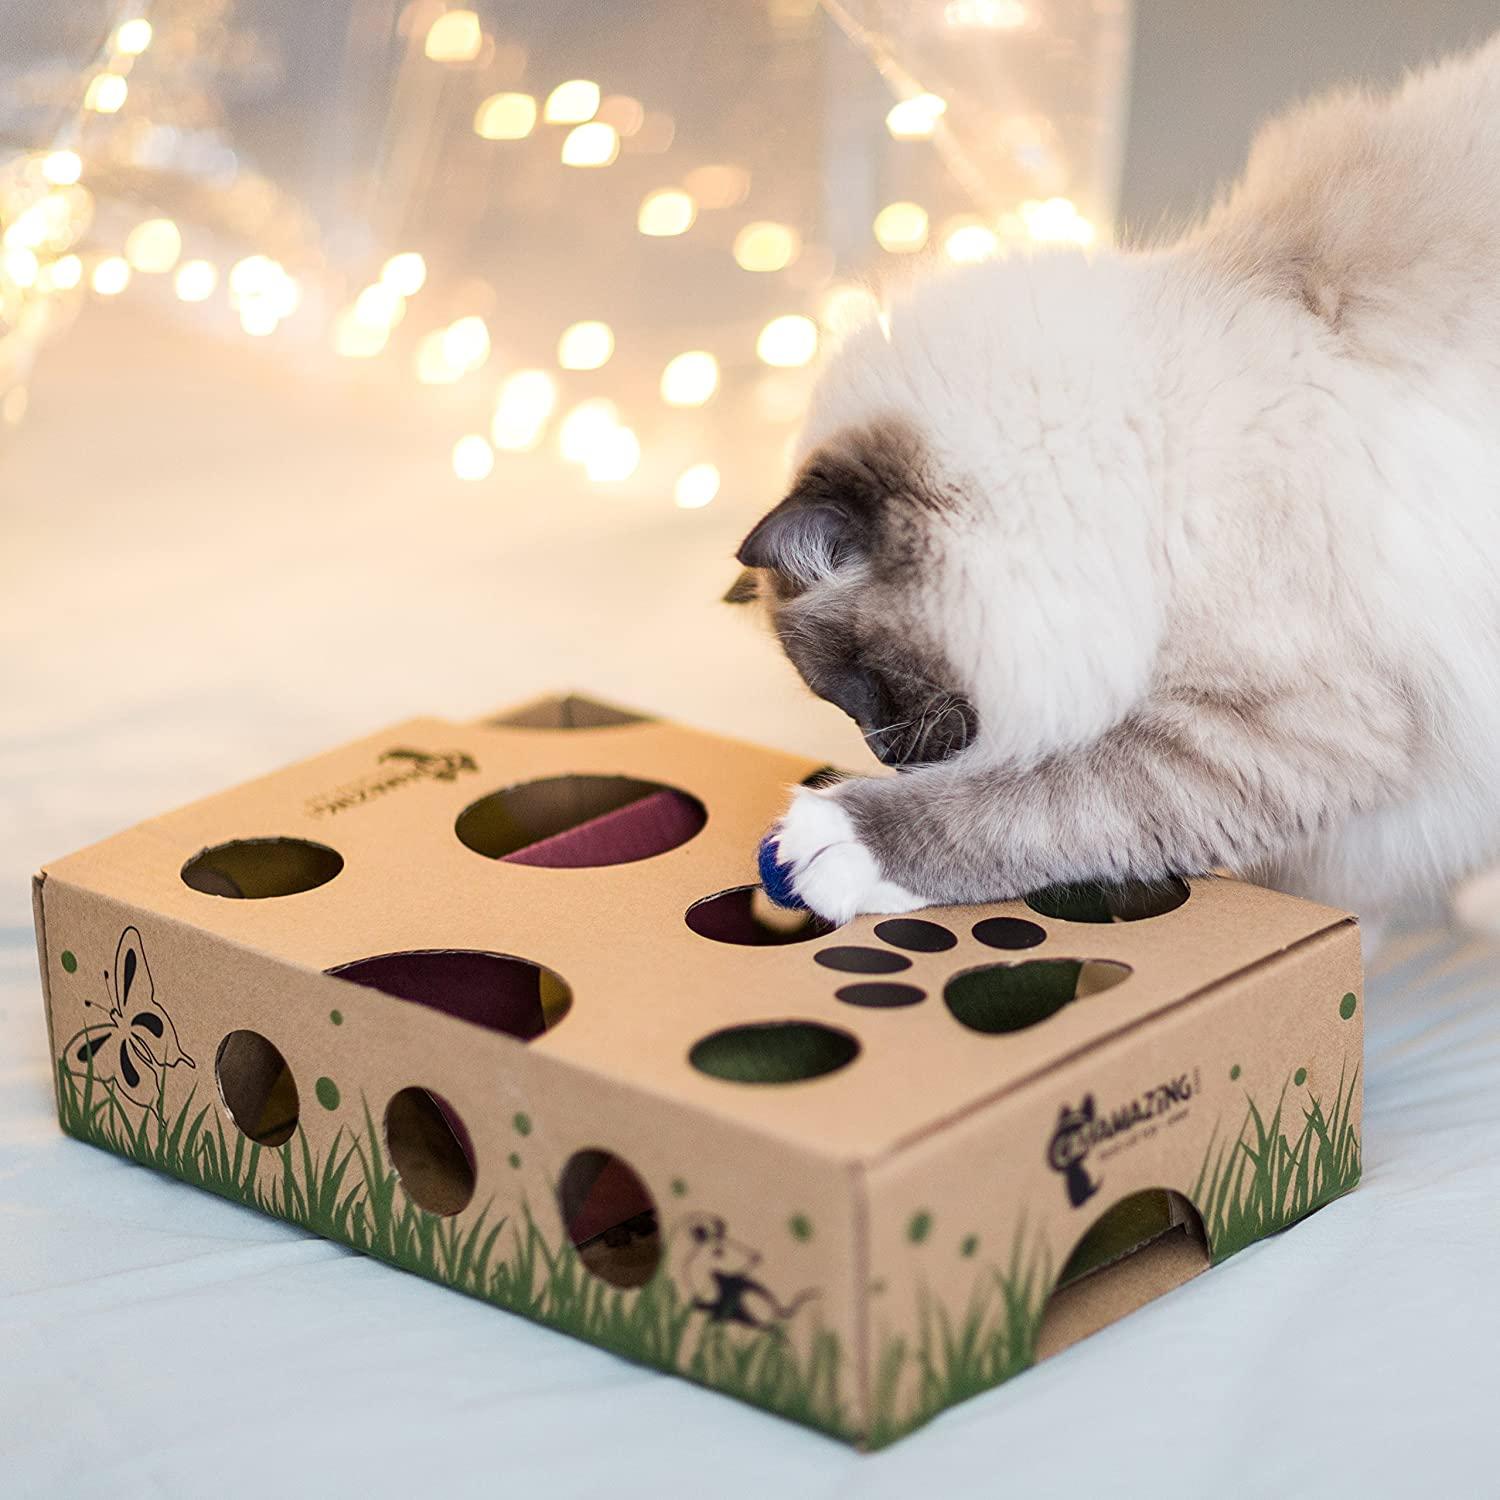 Buy Cat Amazing MEGA - Cat Treat Puzzle Box - Interactive Treat Maze - Cat  Puzzle Feeder - Treat Box for Indoor Cats - Enrichment Food Toy - Best Cat  Toy Ever!